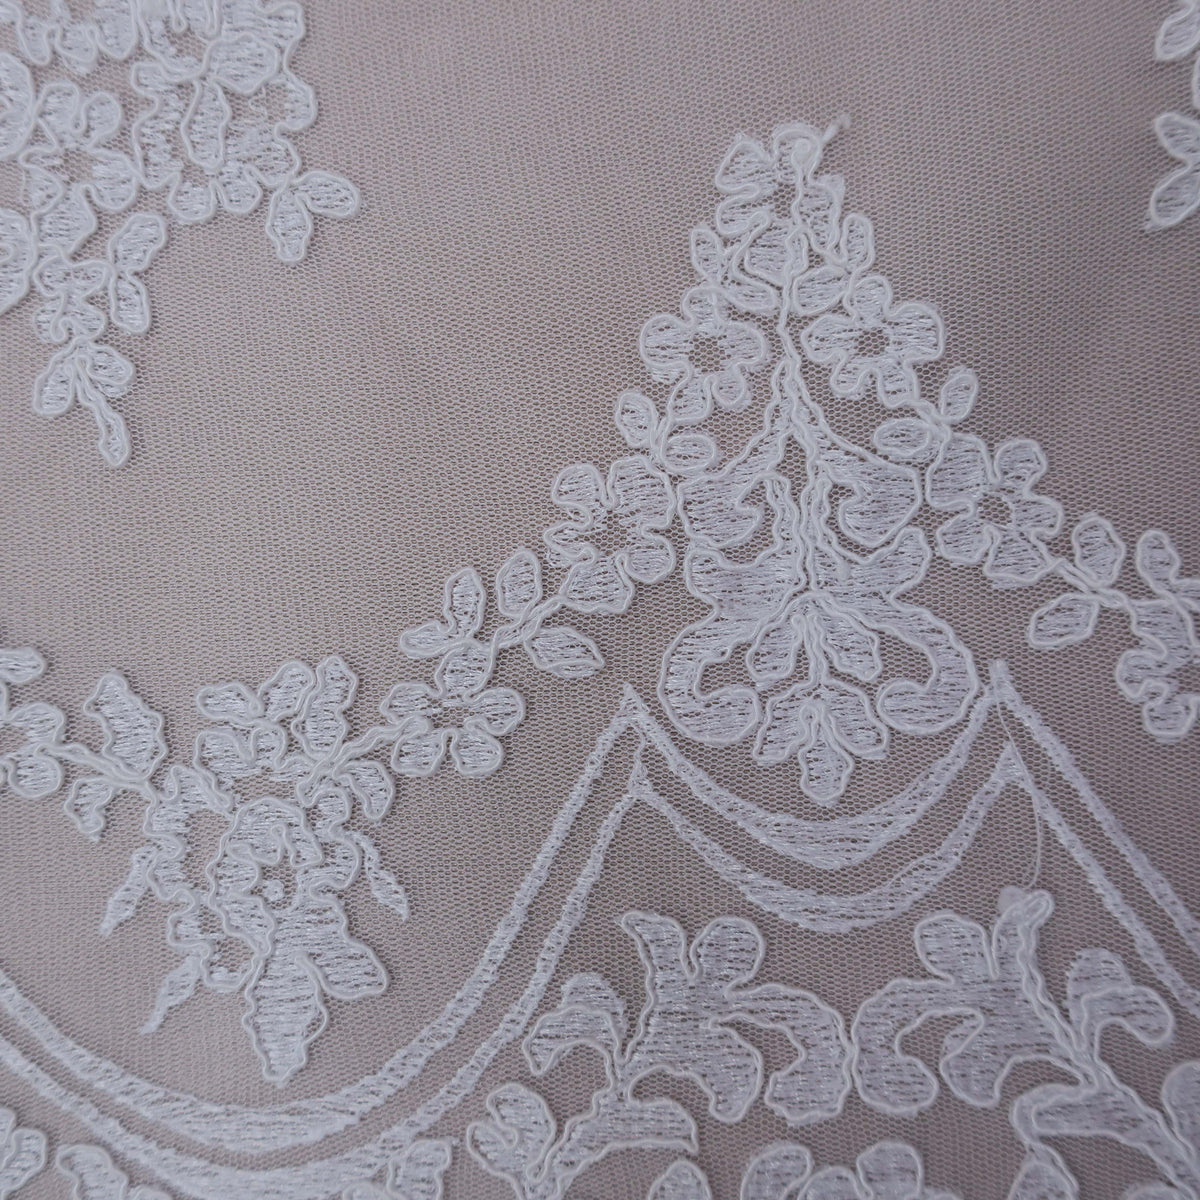 White French Chantilly Lace Trim